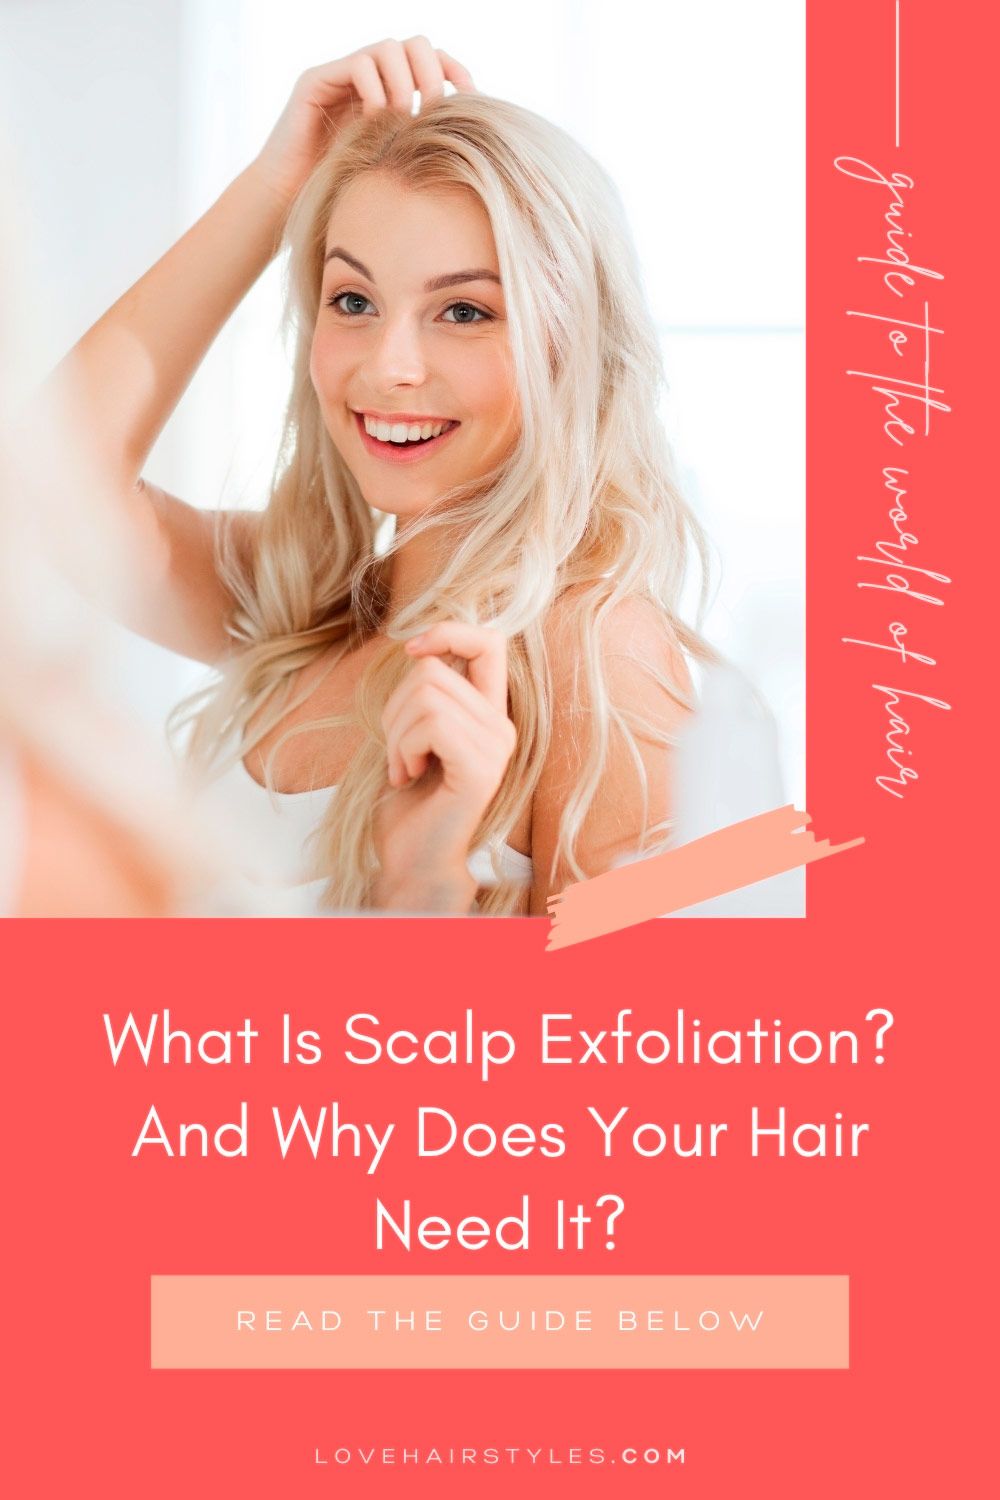 What Is Scalp Exfoliation?